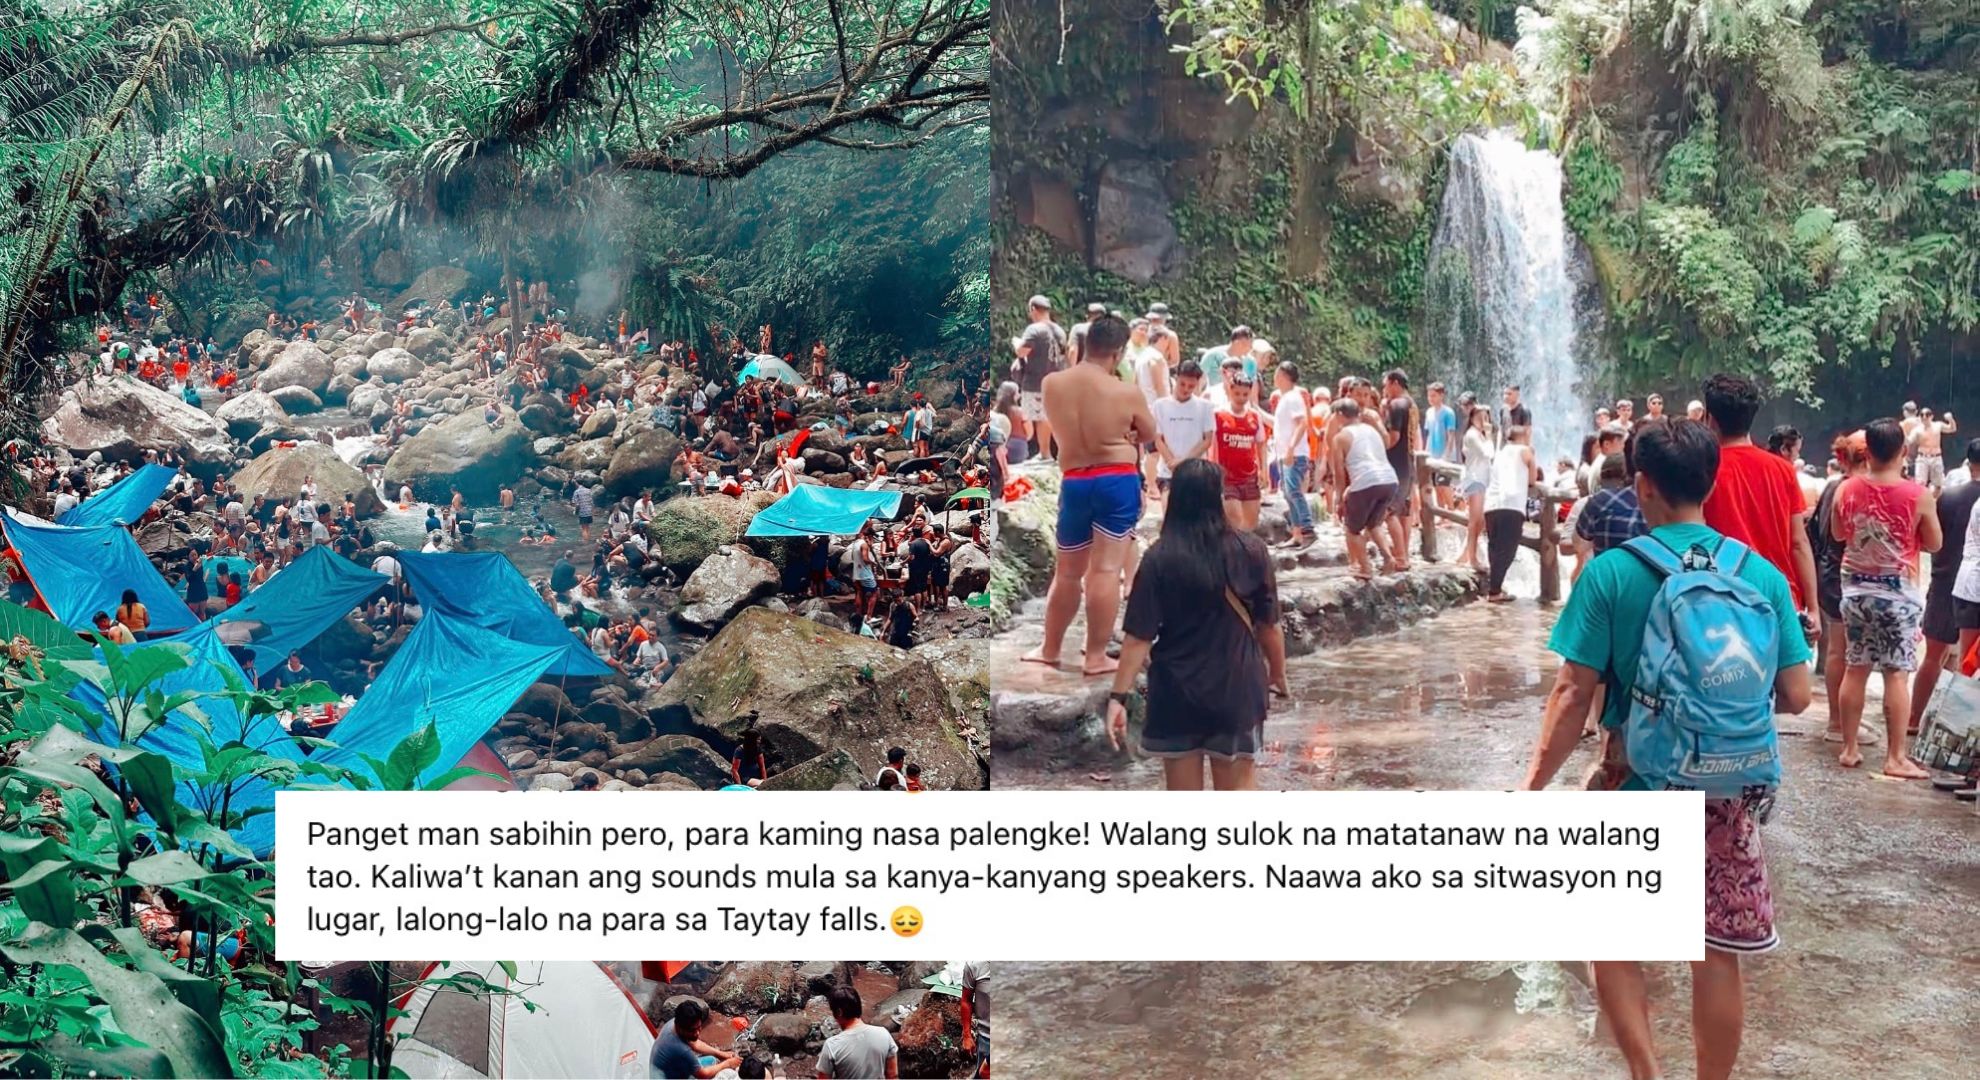 ‘Taytay Falls, or sea of people?:’ Social media user expresses disappointment over overcrowded tourist spot